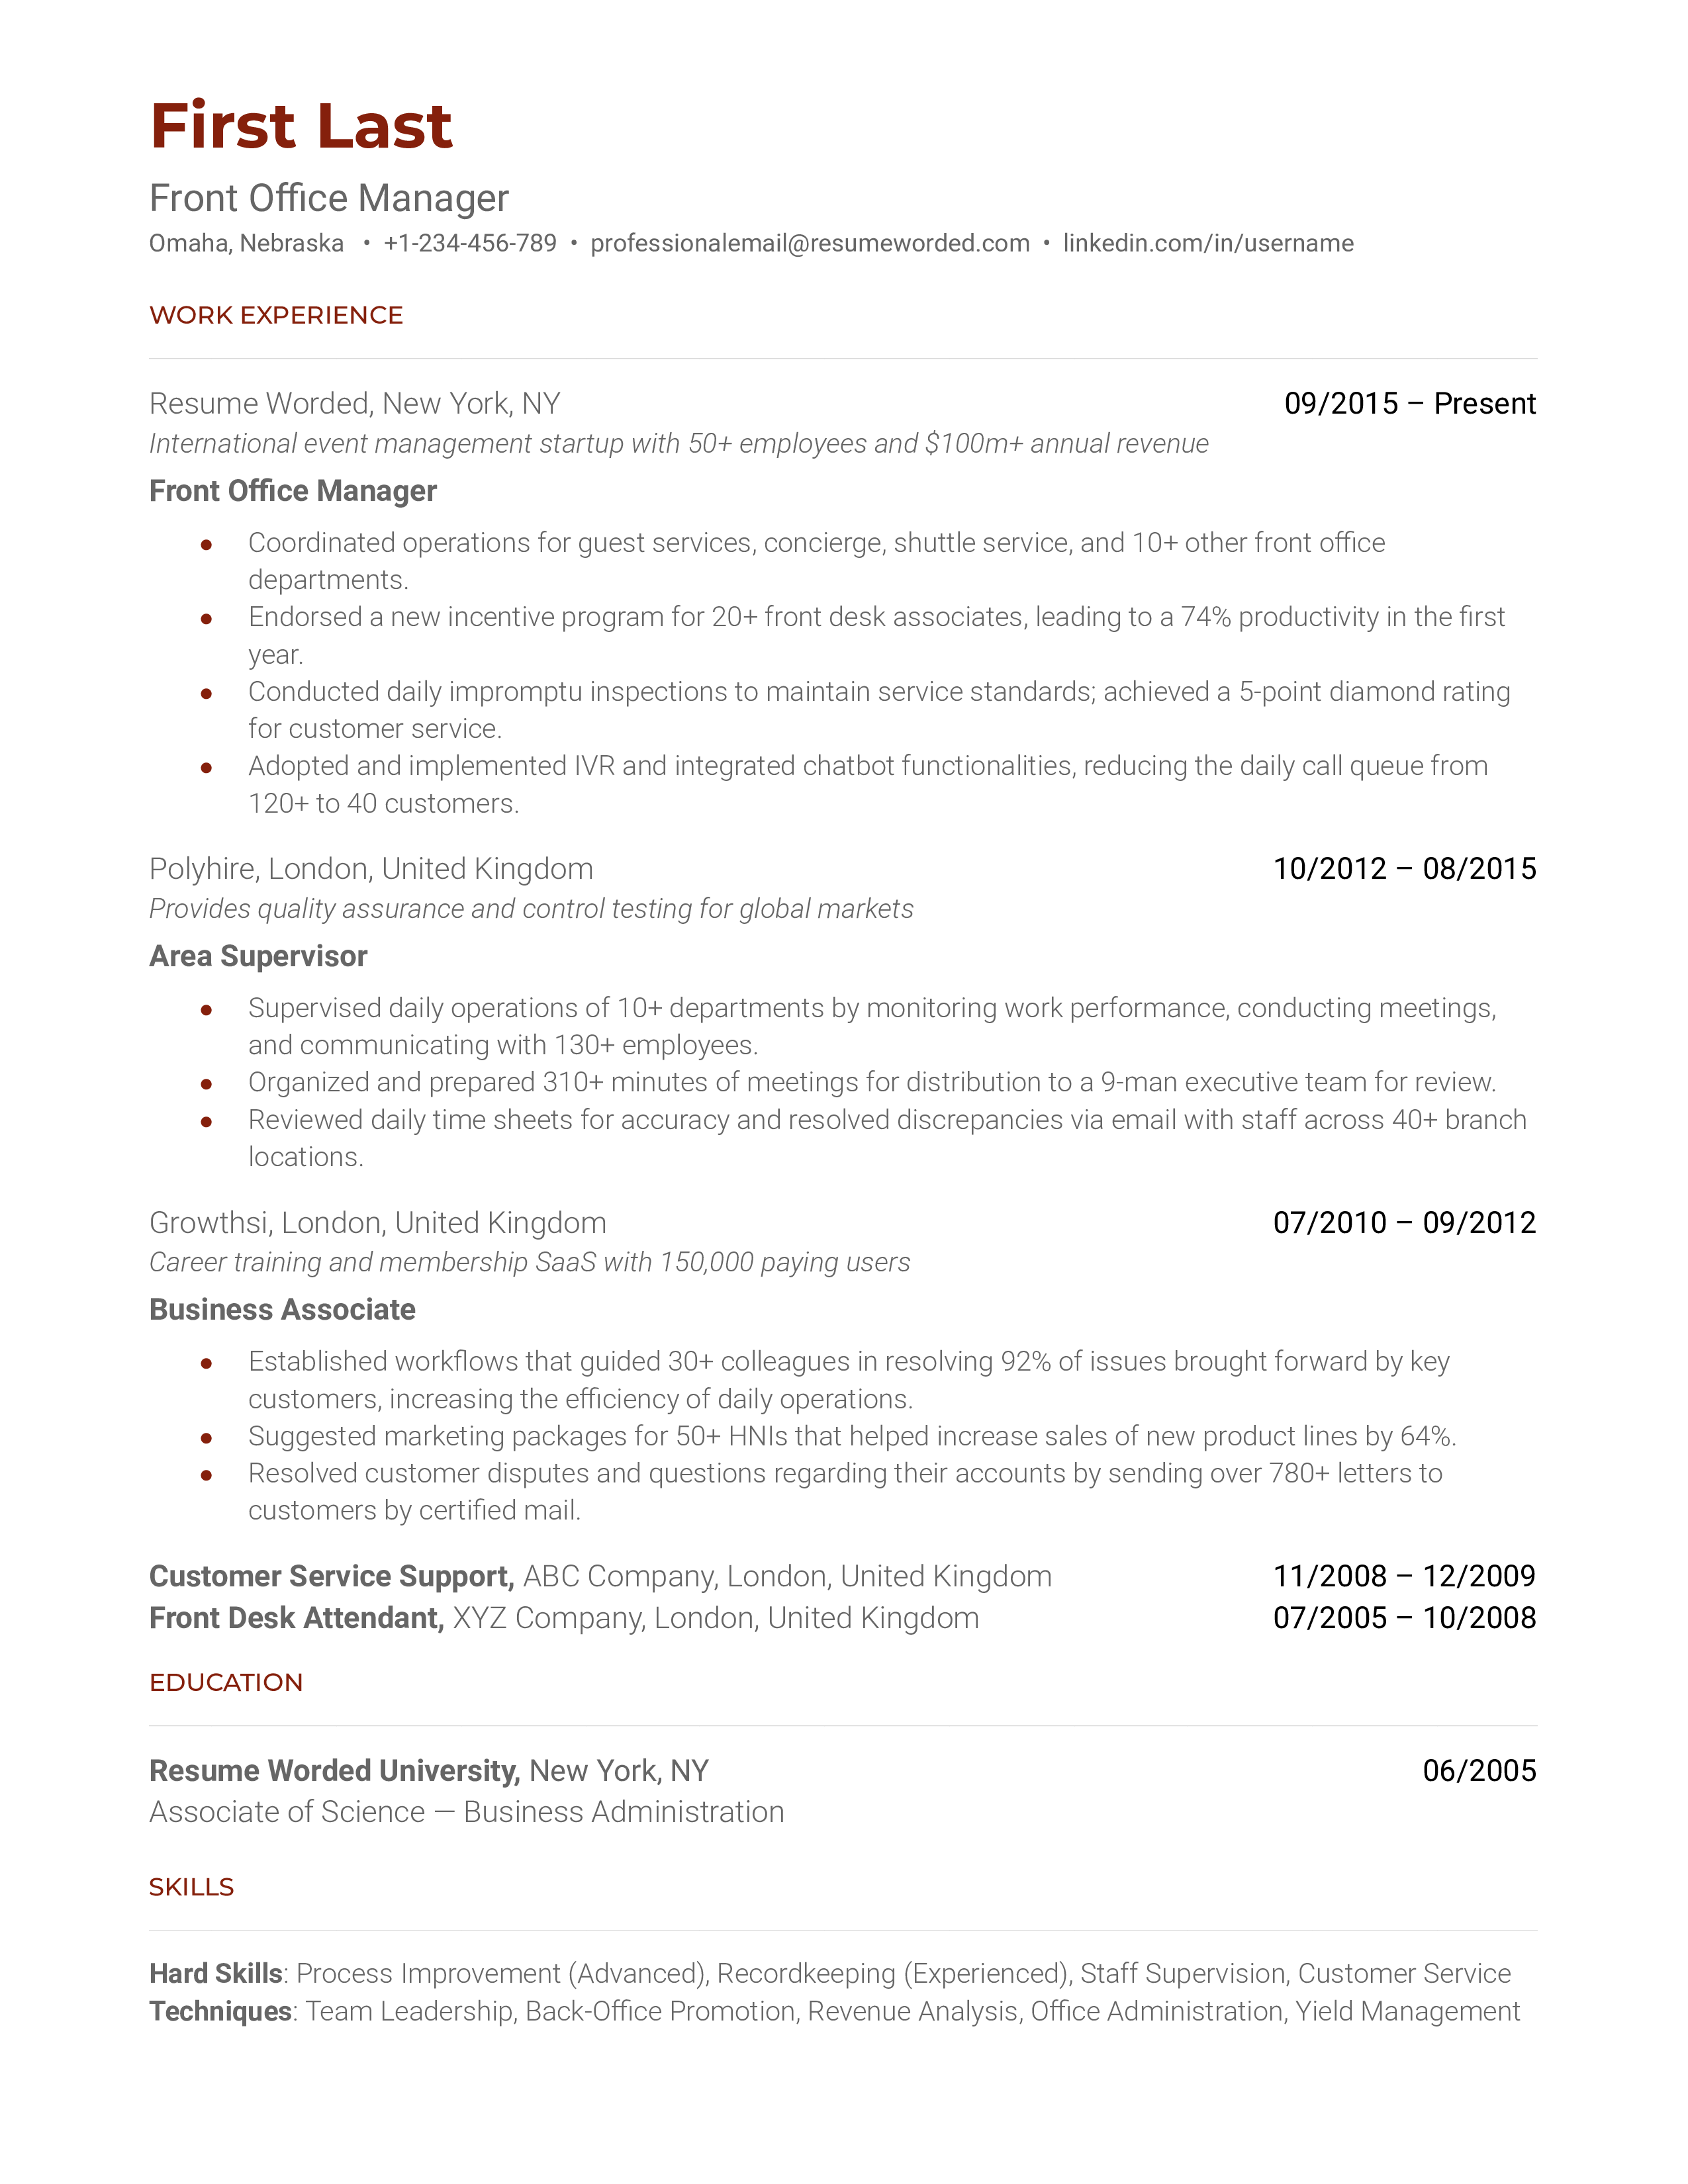 Detailed CV of a professional applying for a Front Office Manager role.